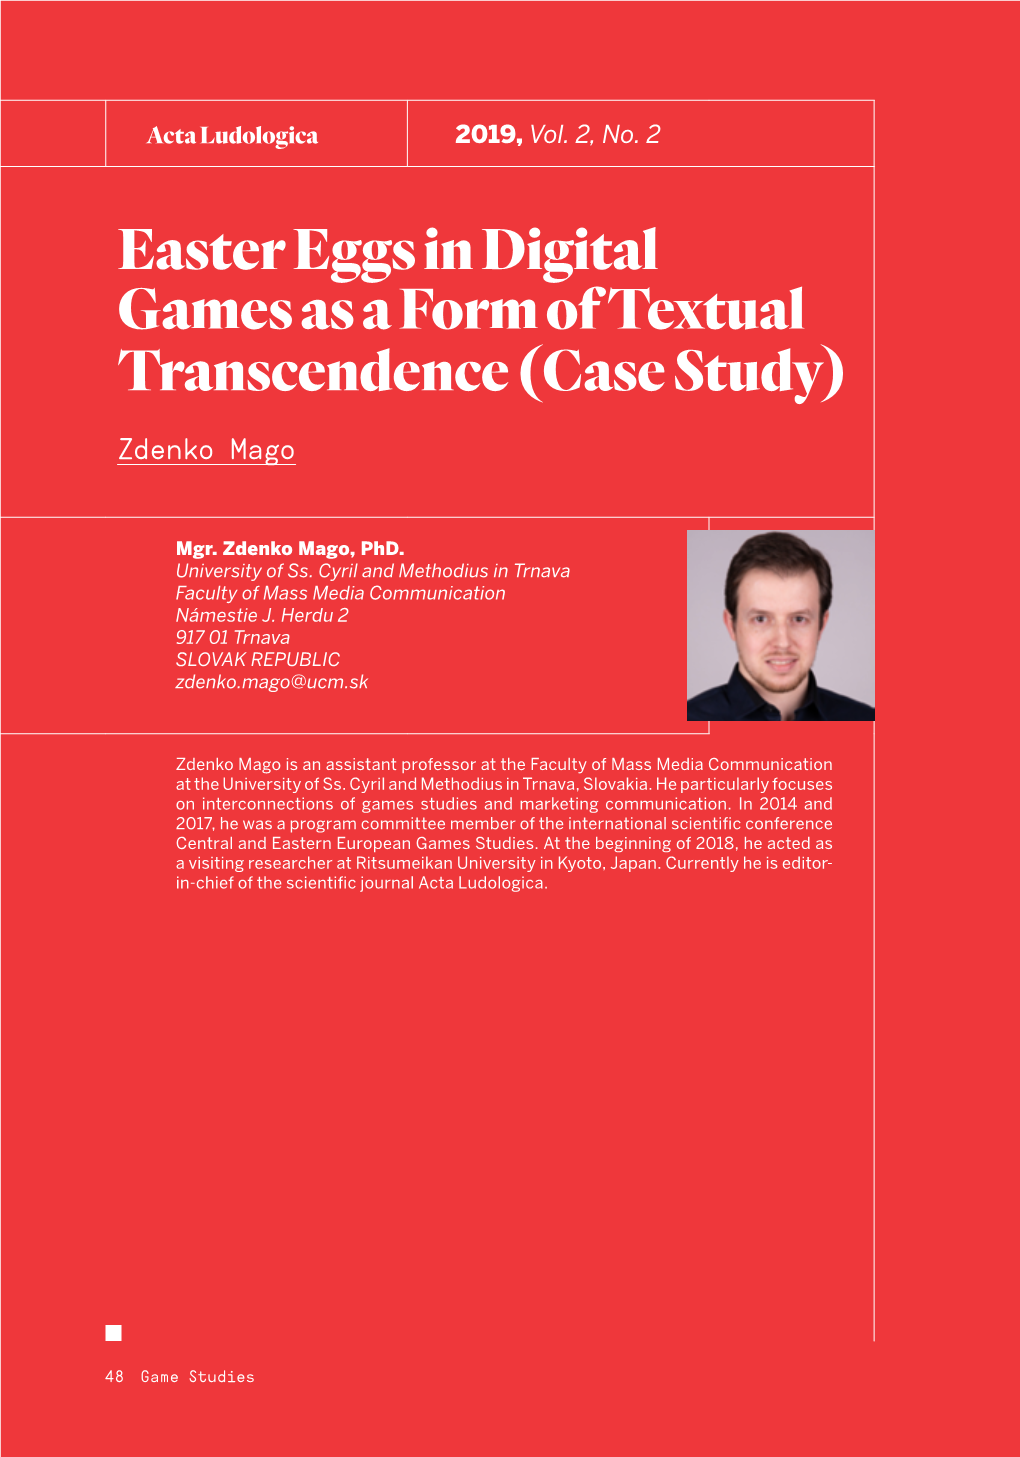 Easter Eggs in Digital Games As a Form of Textual Transcendence (Case Study)